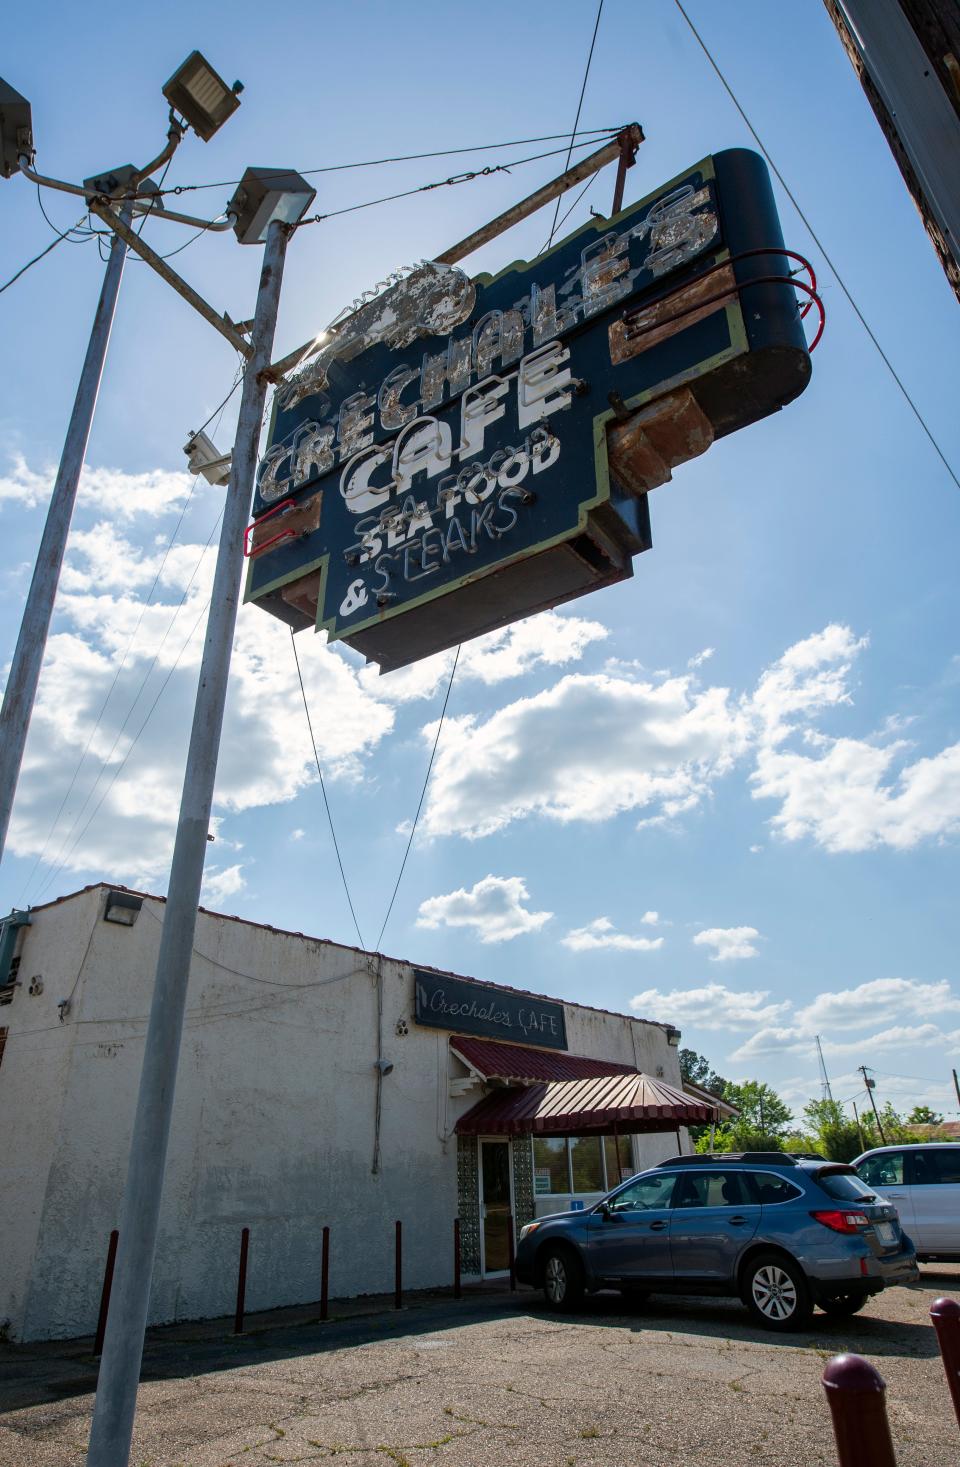 Crechale's on U.S. 80 in Jackson, Miss., opened in 1956, is one of the oldest restaurants in the city. (Clarion Ledger/File photo)